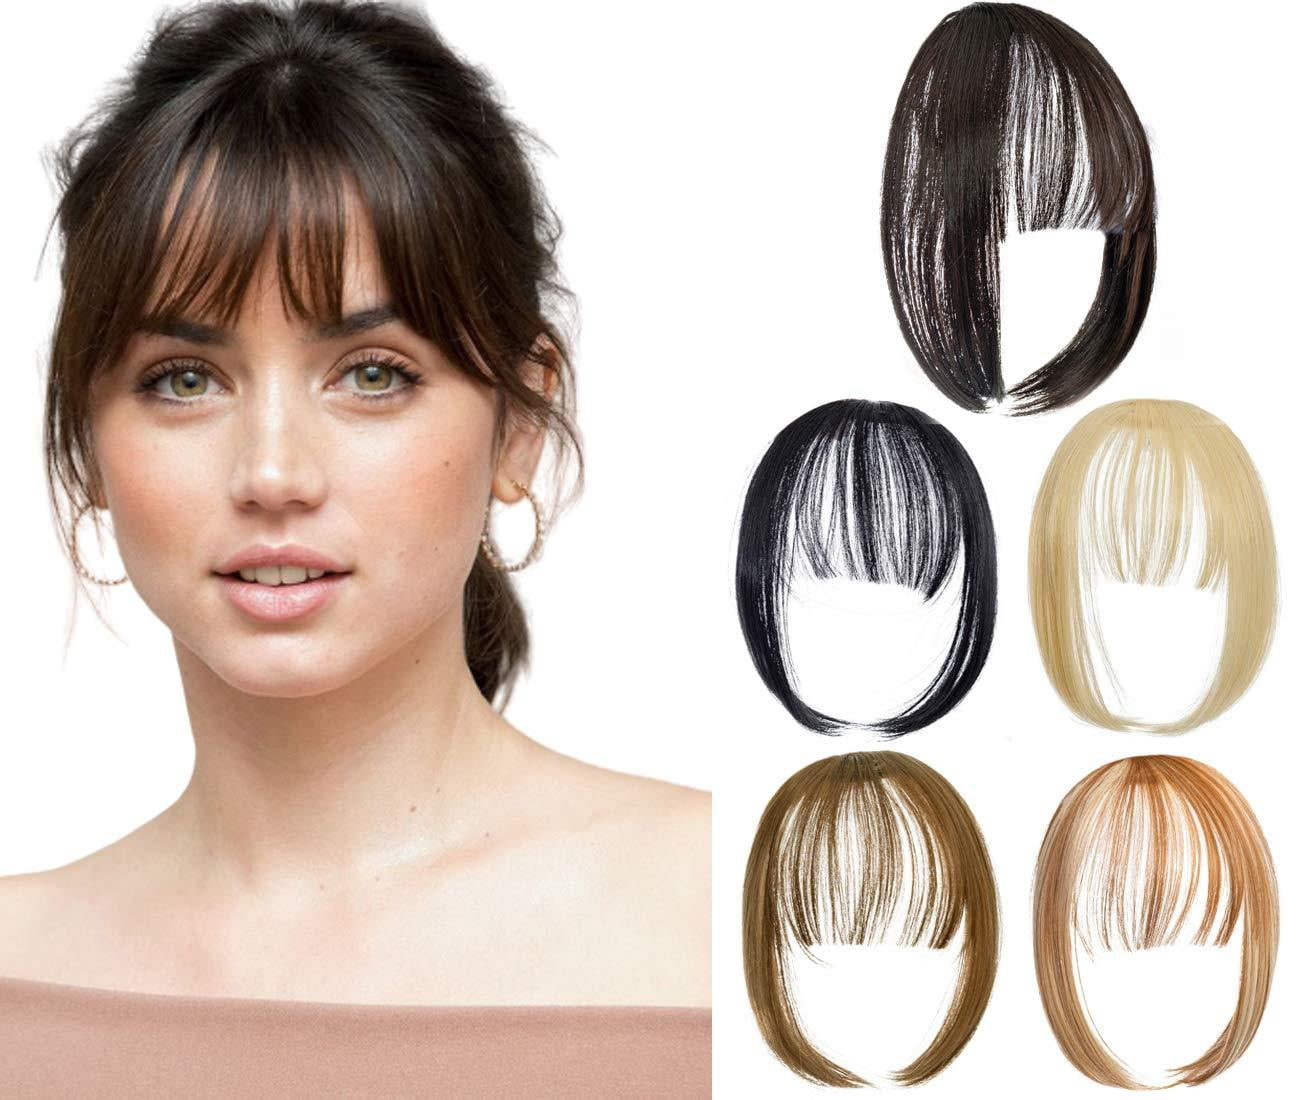 Felendy Clip in Bangs Hair Piece One Piece Thin Fringe Front Neat Air Bangs  Extensions with Temple Hand Made One Size- Upgraded Version Ash Blonde -  